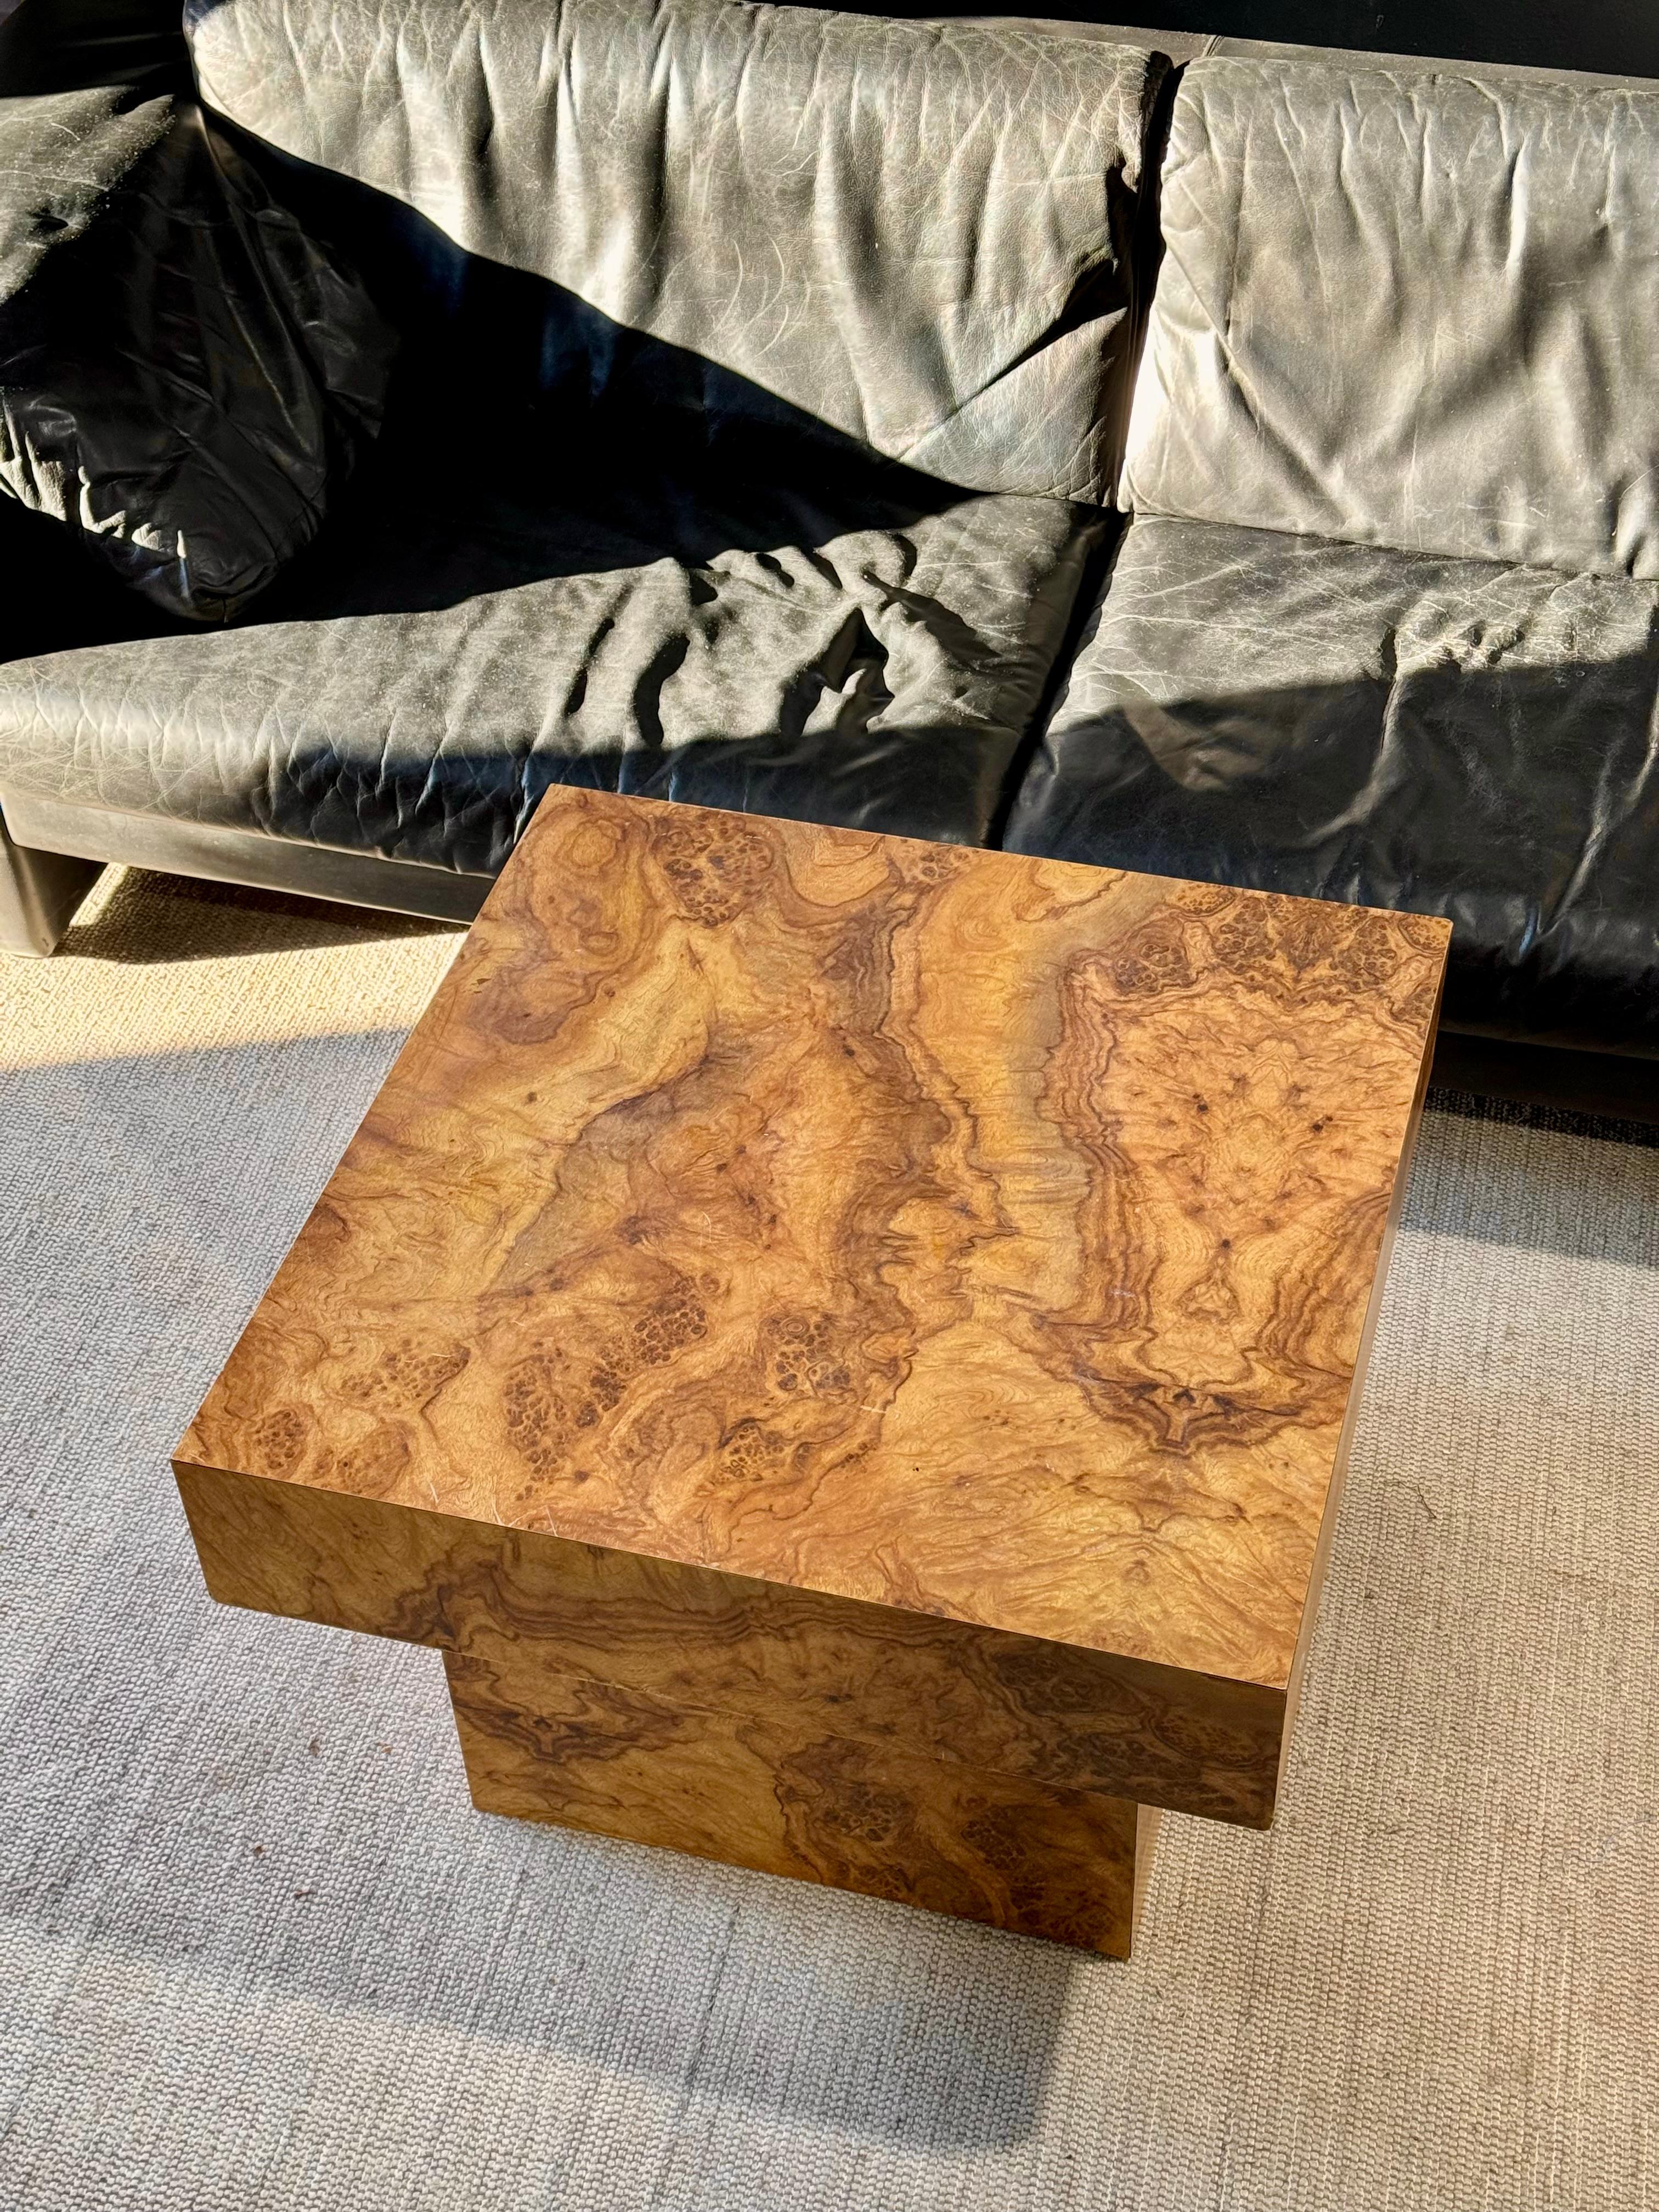 Mesmerizing vintage 1960’s burlwood plinth style coffee table. Fabulous to behold, with dynamic texture play between the sharp corners & organic wood grain. 

Incredible burl laminate mounted to a clean block silhouette. In good vintage condition,